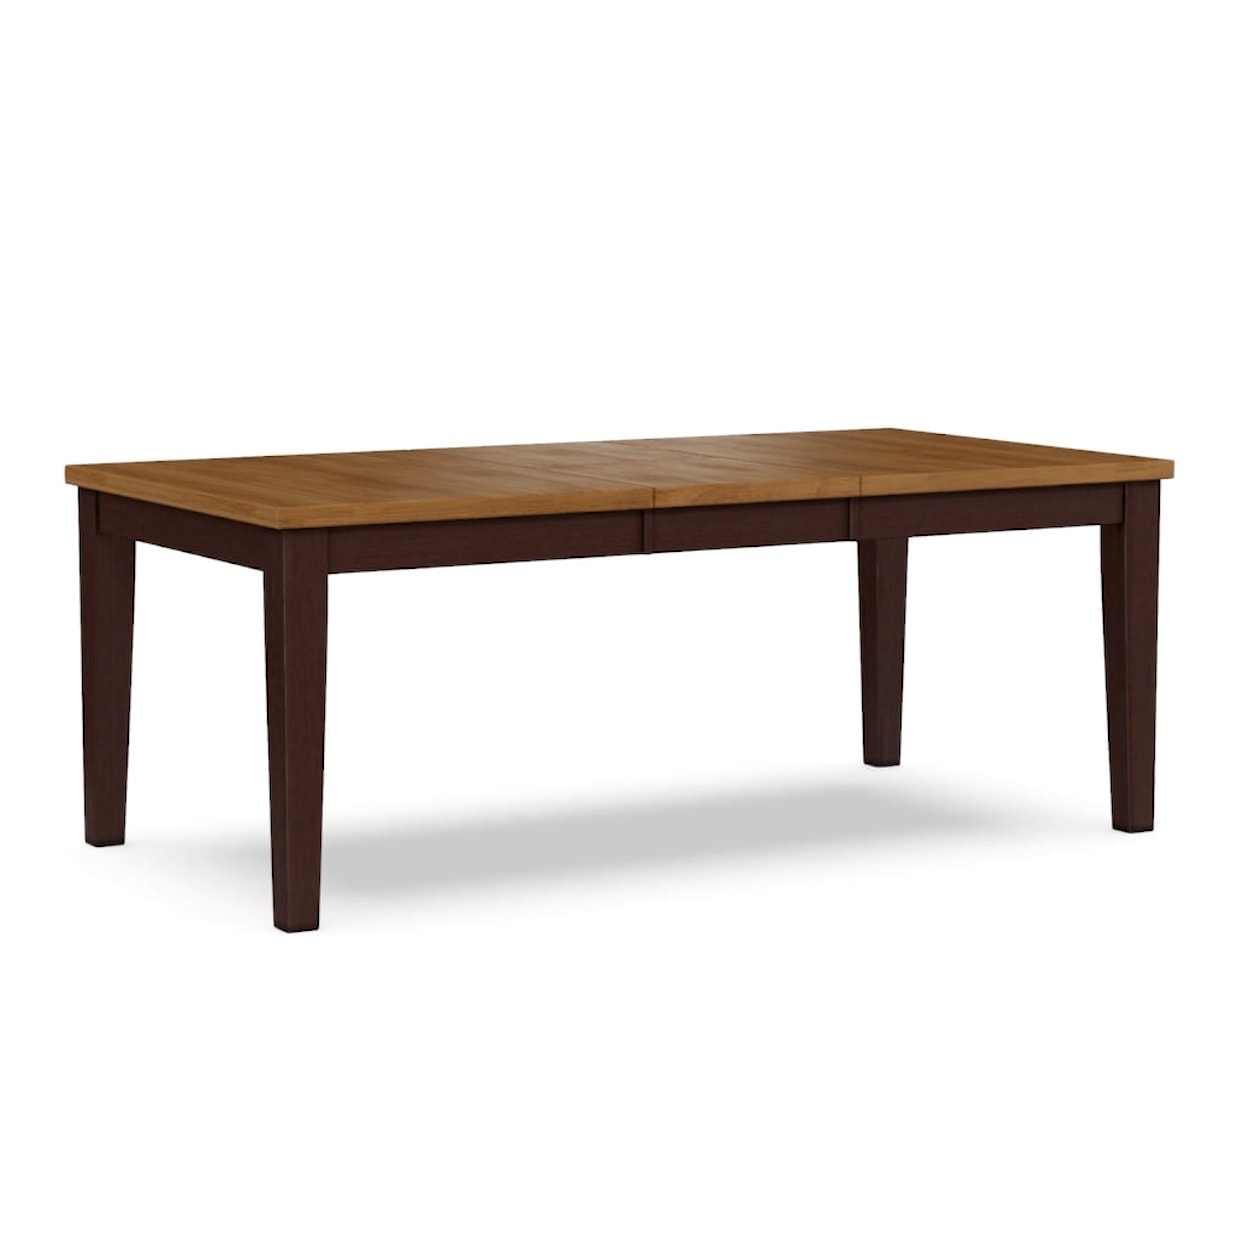 John Thomas Curated Collection Two-Tone Dining Table with Shaker Legs